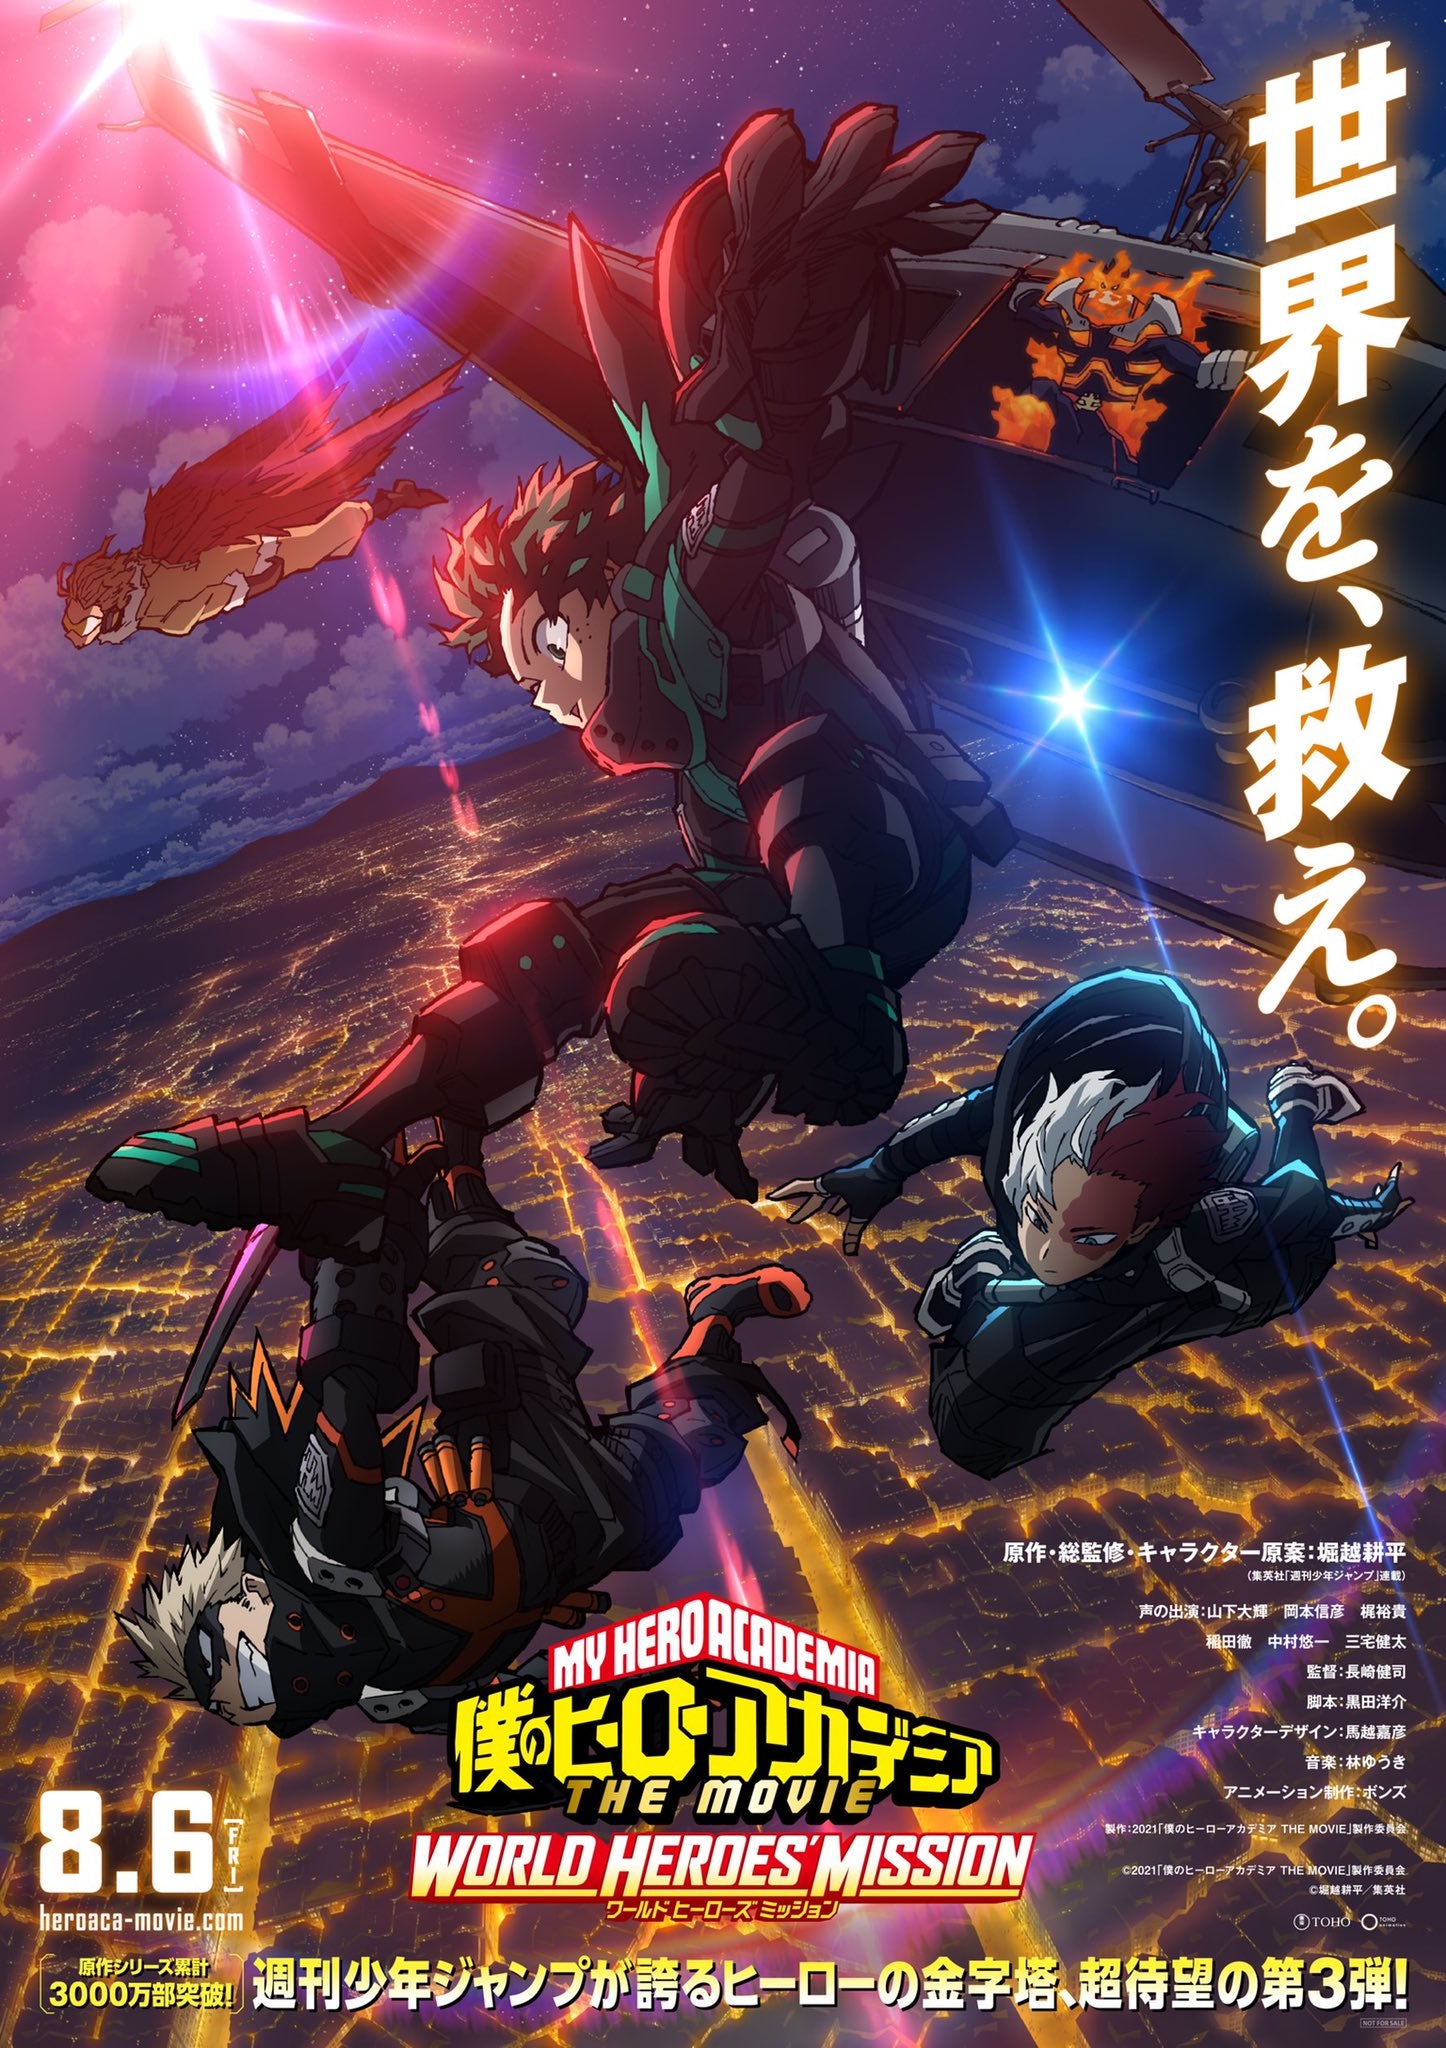 My Hero Academia WORLD HEROES MISSION Movie Trailer with English